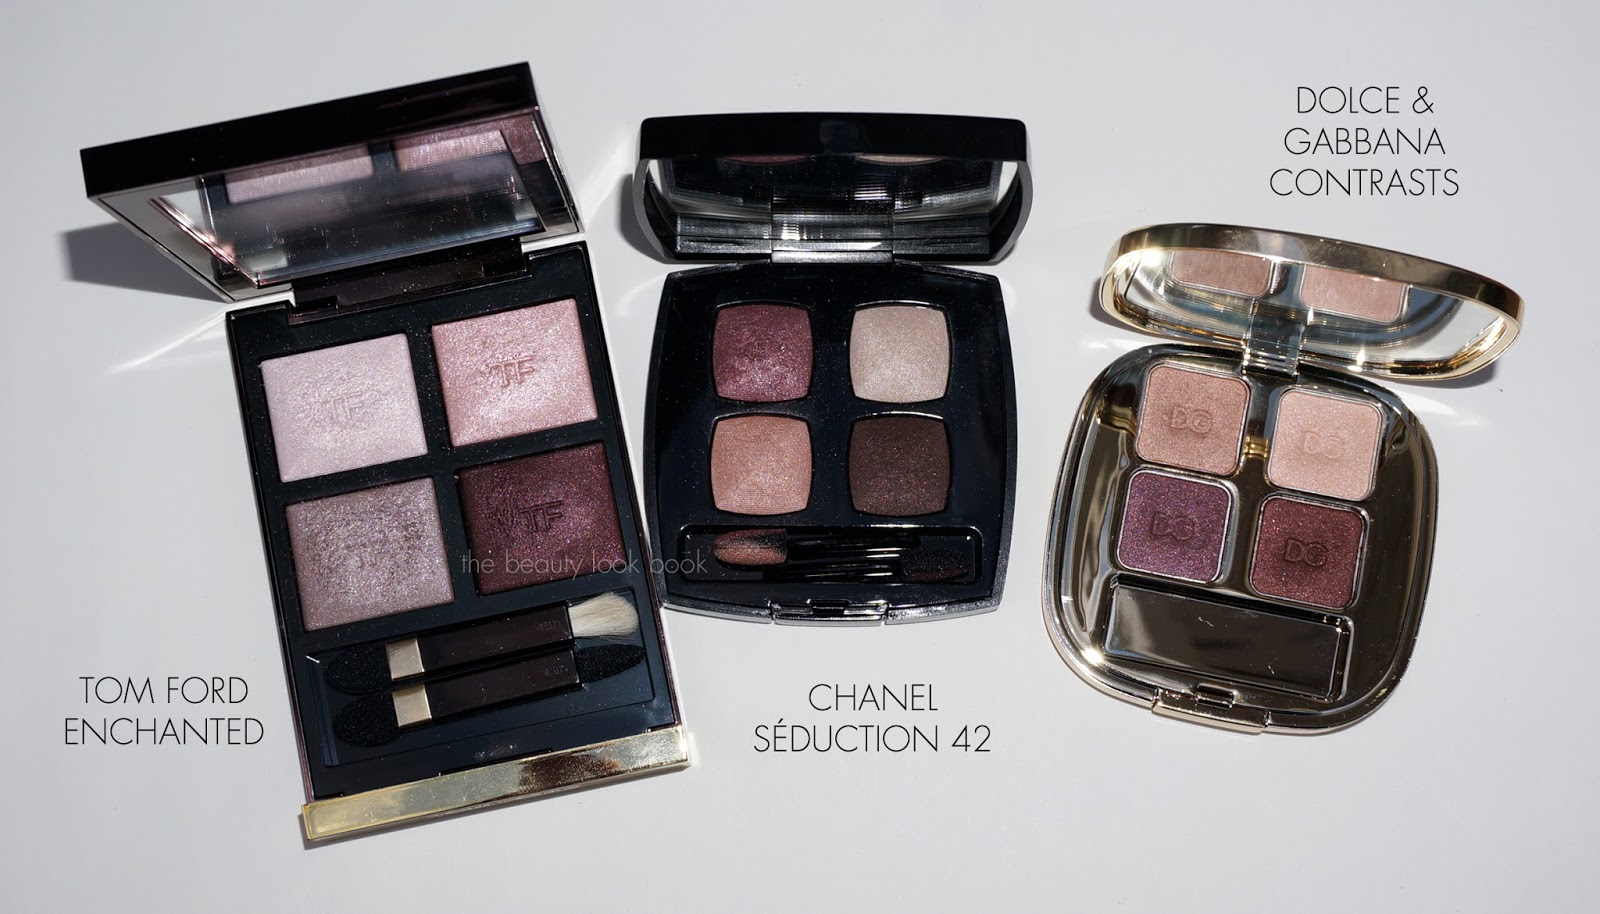 Chanel Les 4 Ombres Quadra Eye Shadow in Mystic Eyes Review